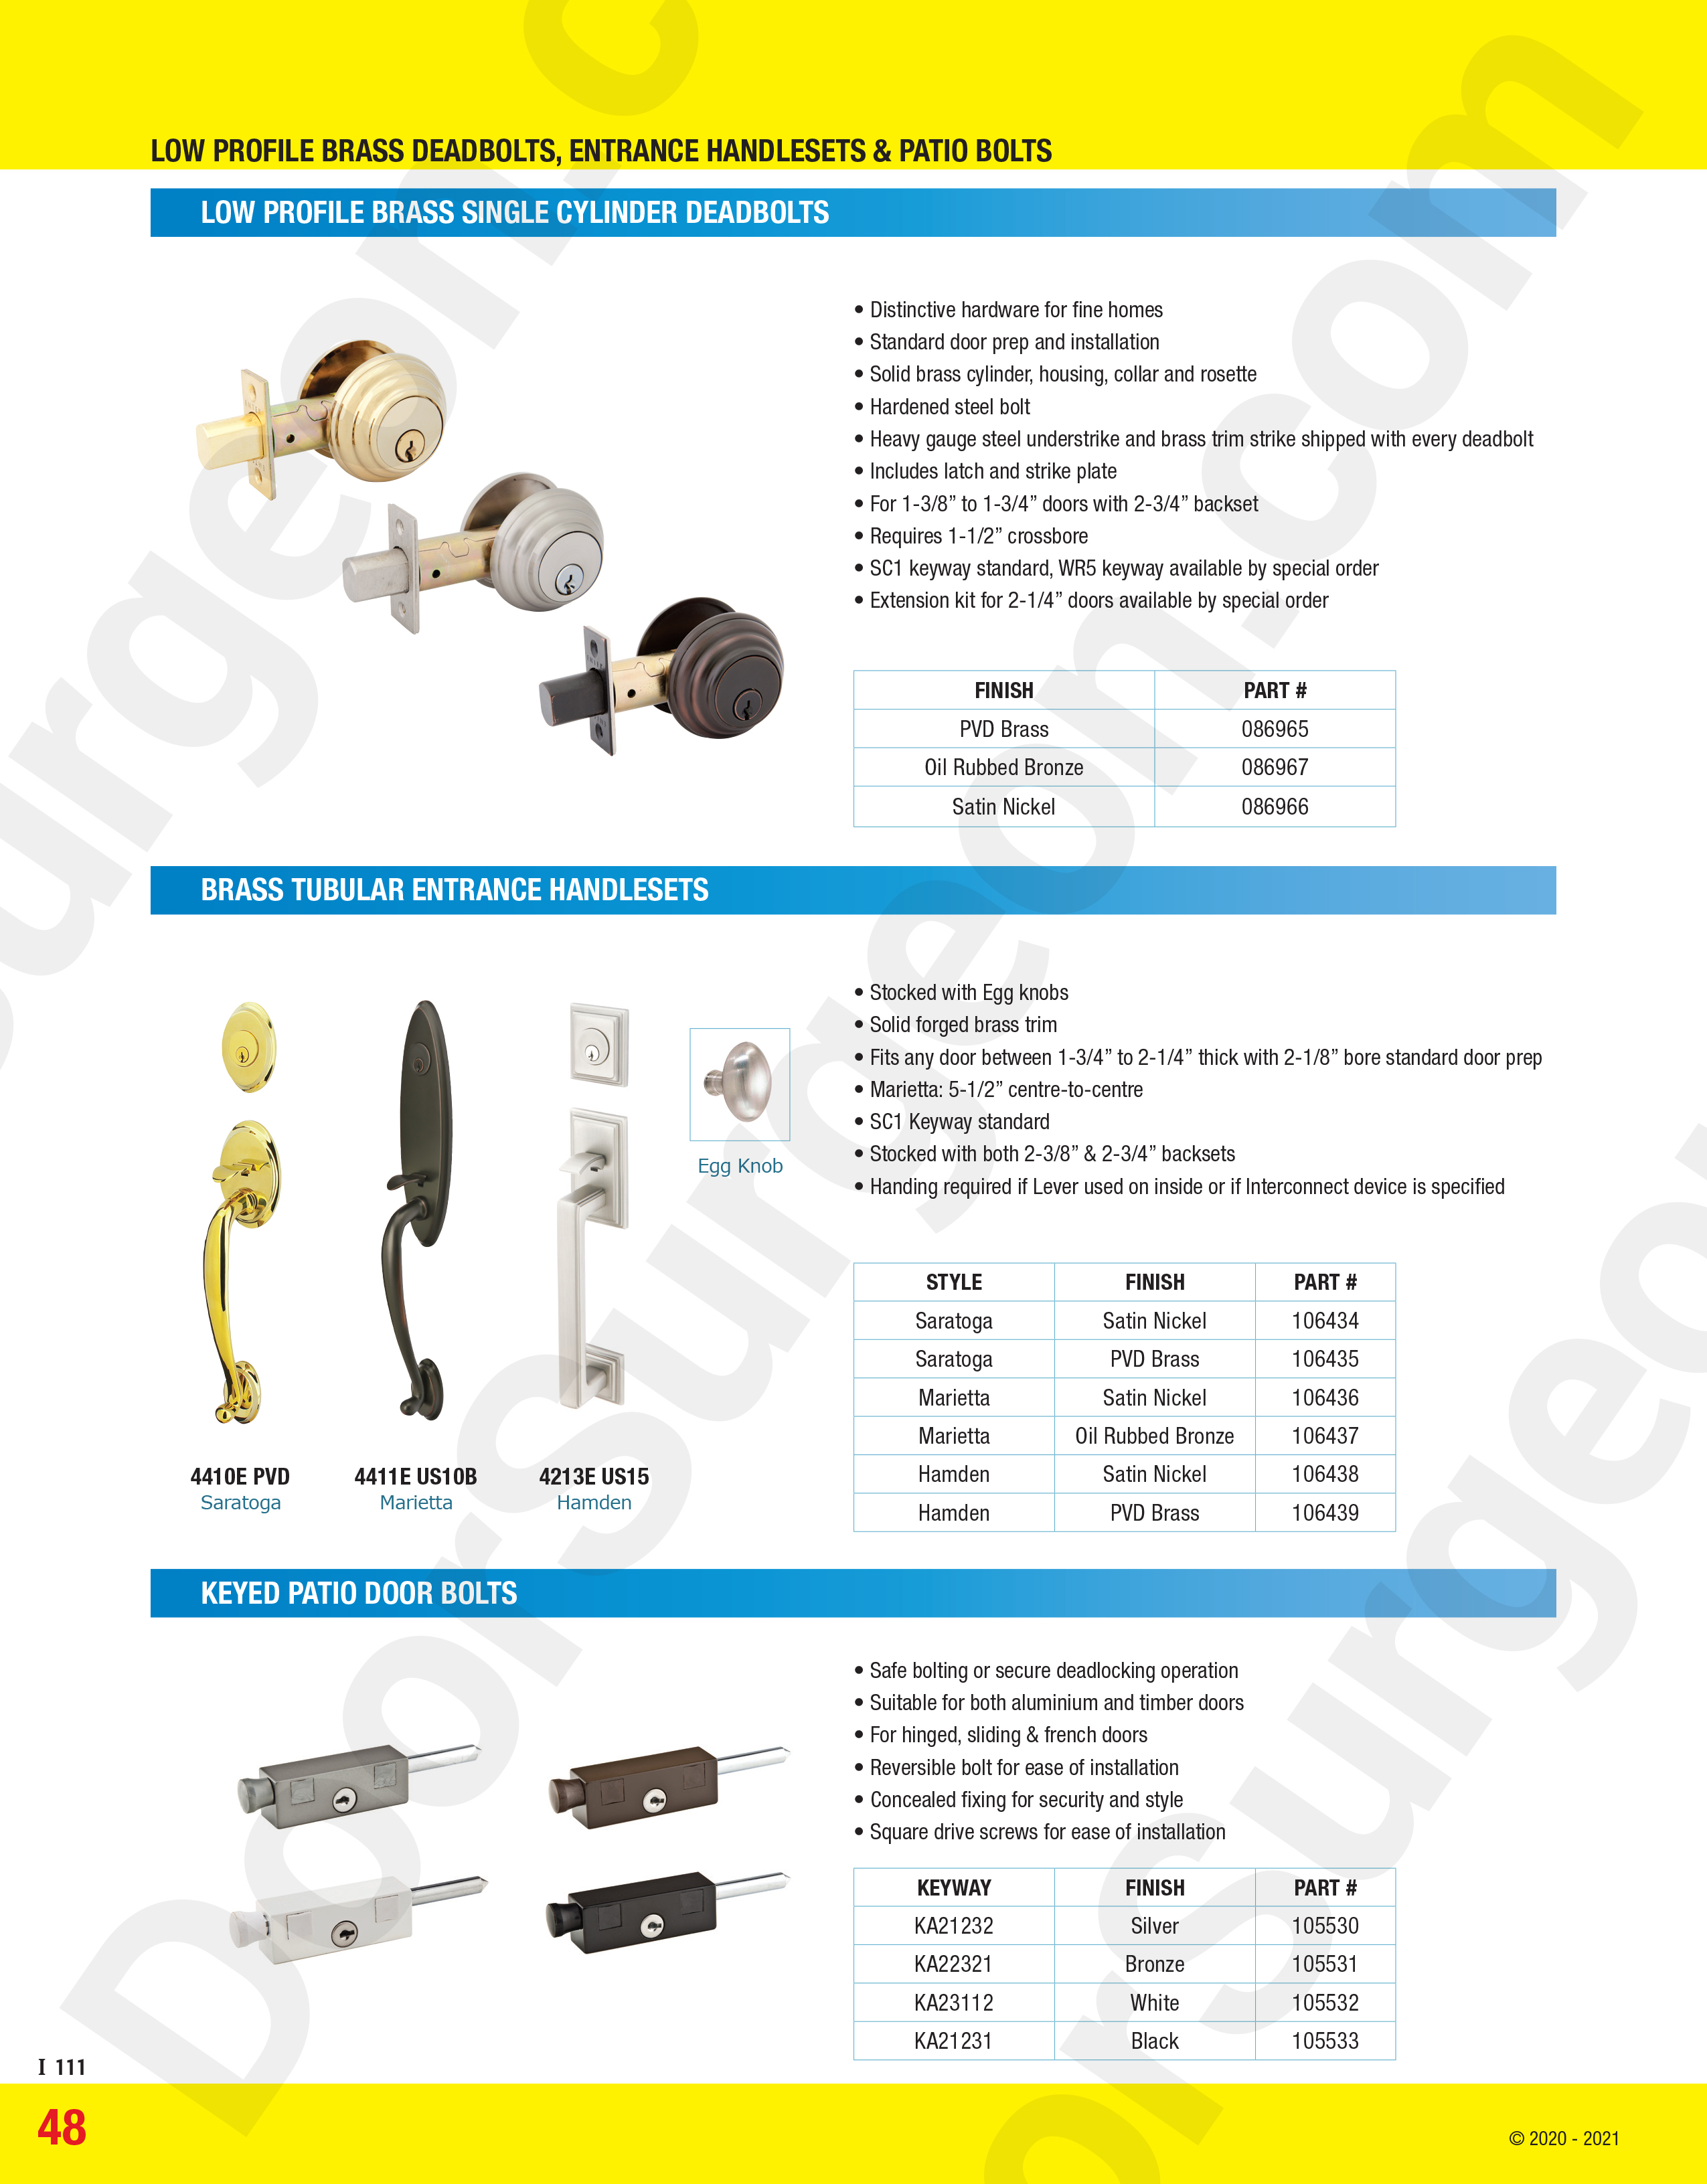 Made for style and function schlage deadbolts handles. Locking Patio pins to lock down patio doors